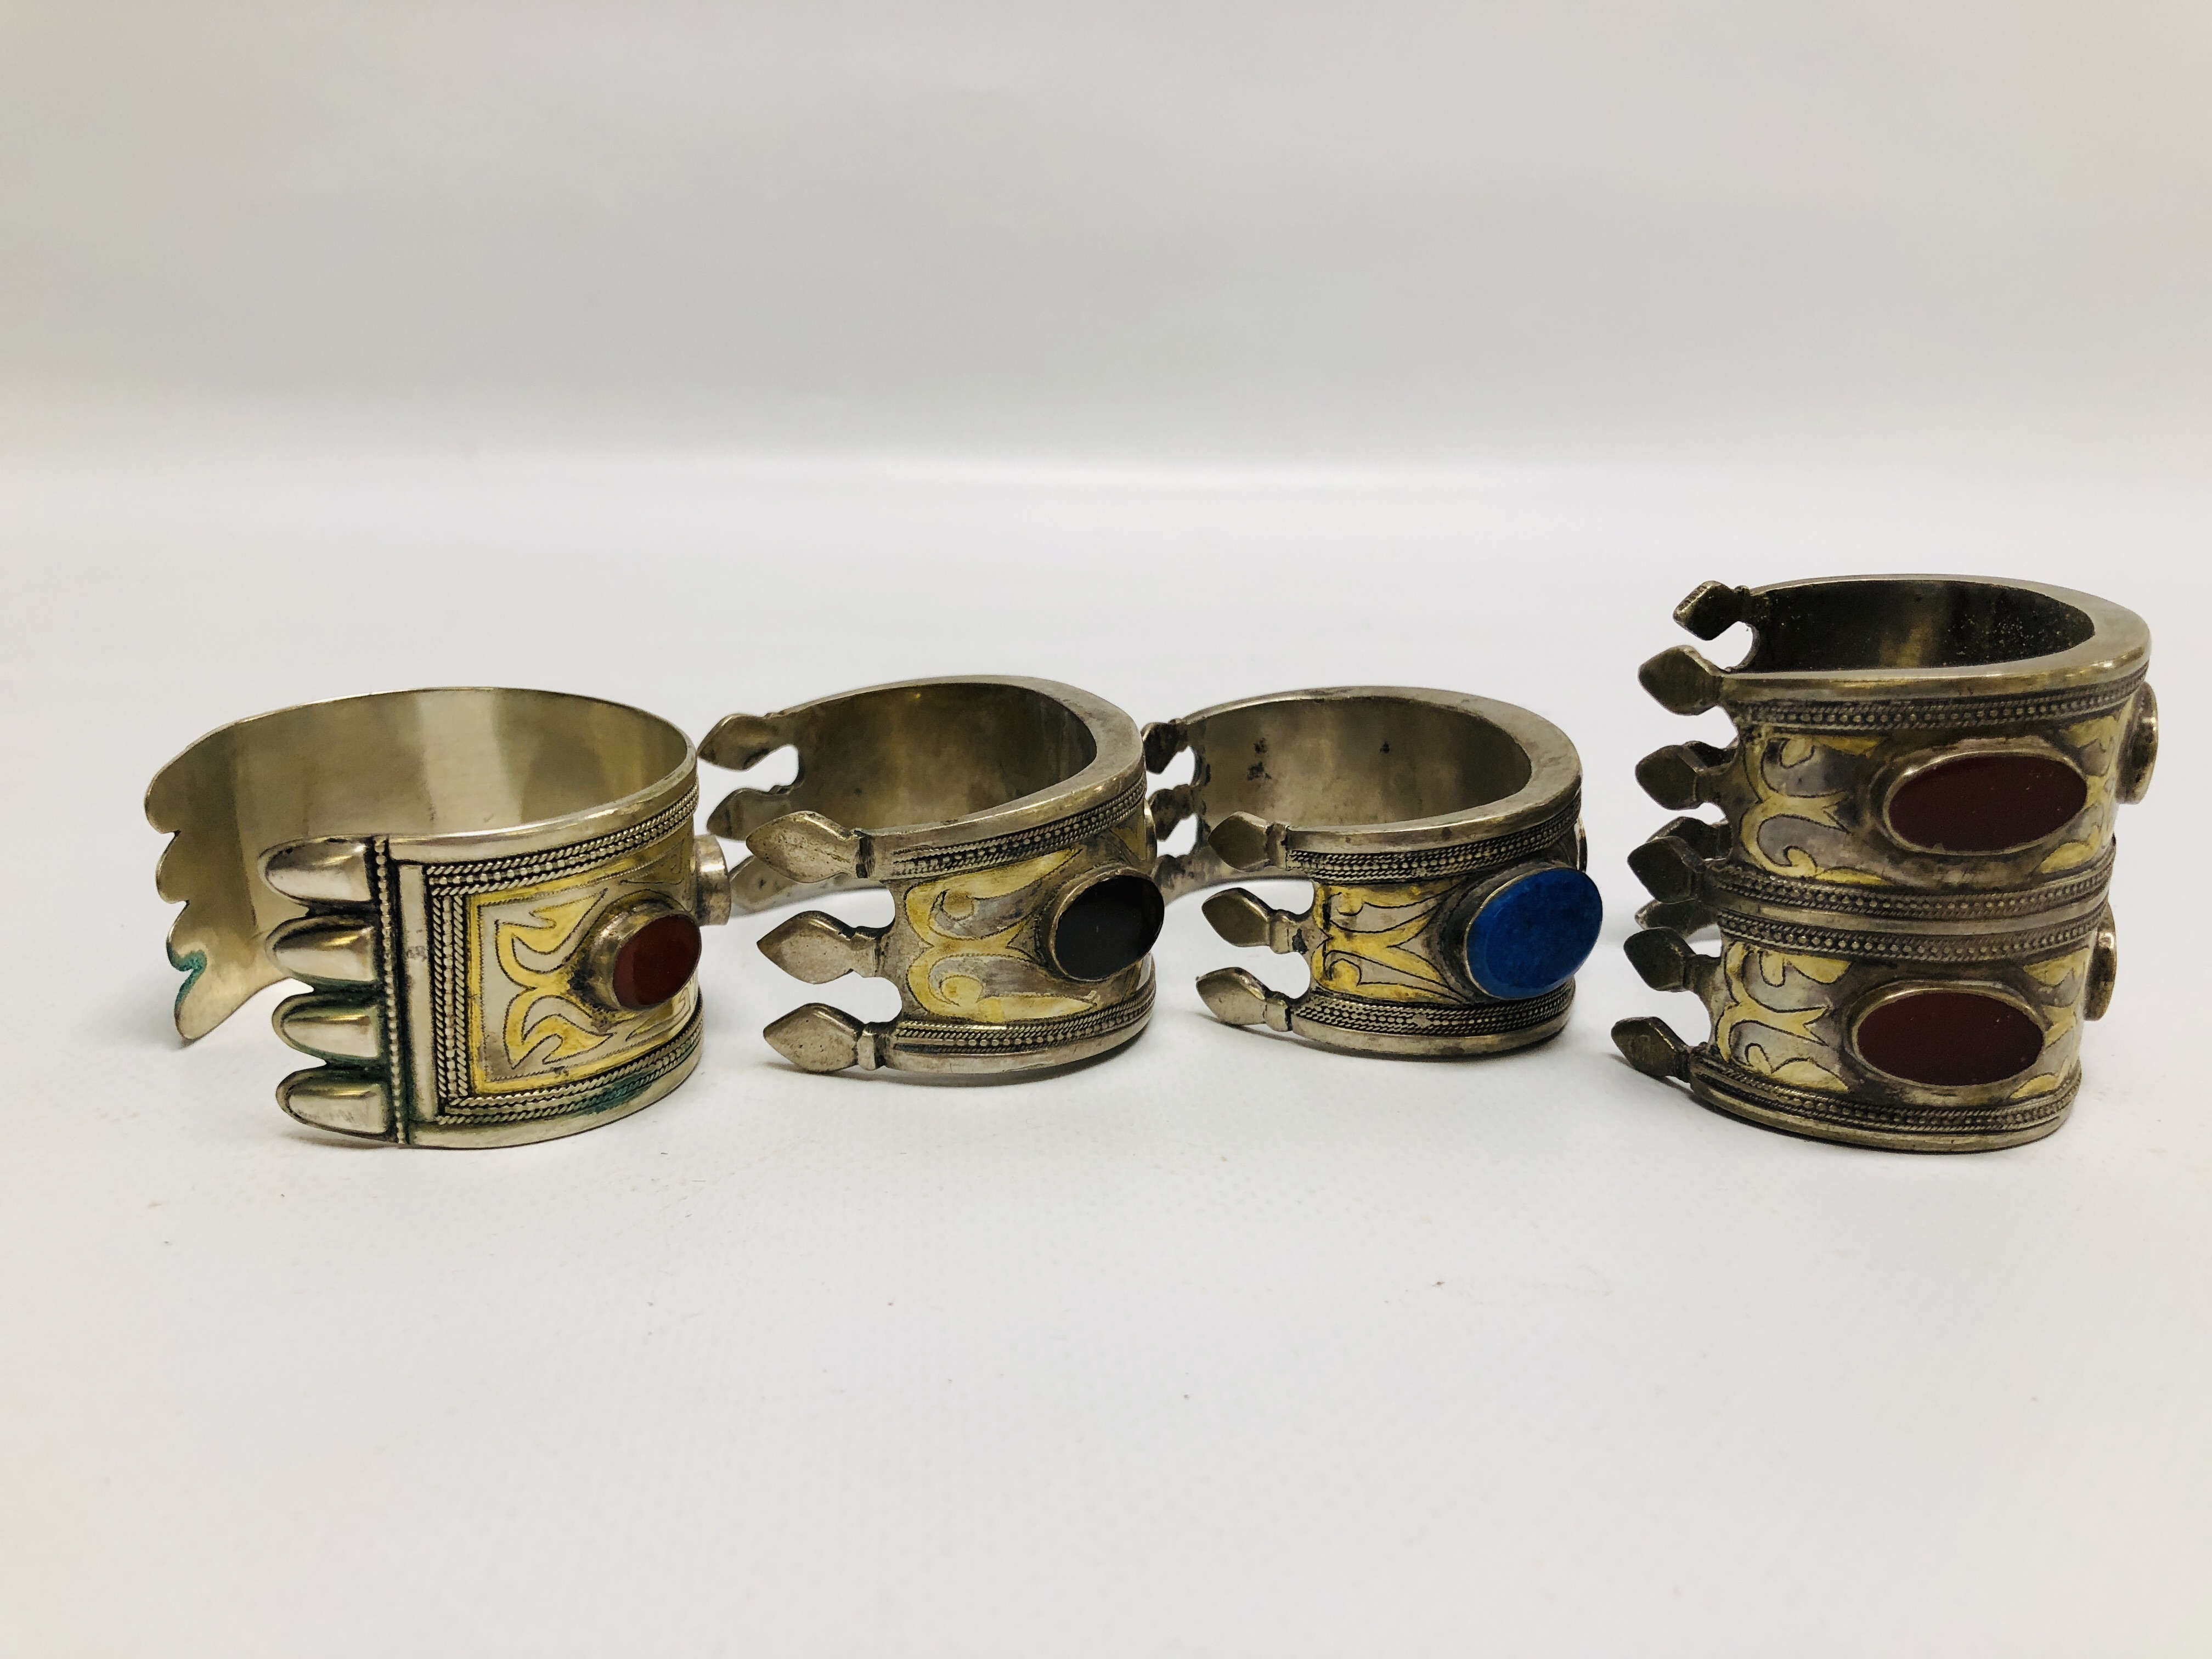 A GROUP OF 4 EASTERN STYLE WHITE METAL CUFF BRACELETS, INSET WITH OVAL STONES. - Image 7 of 8